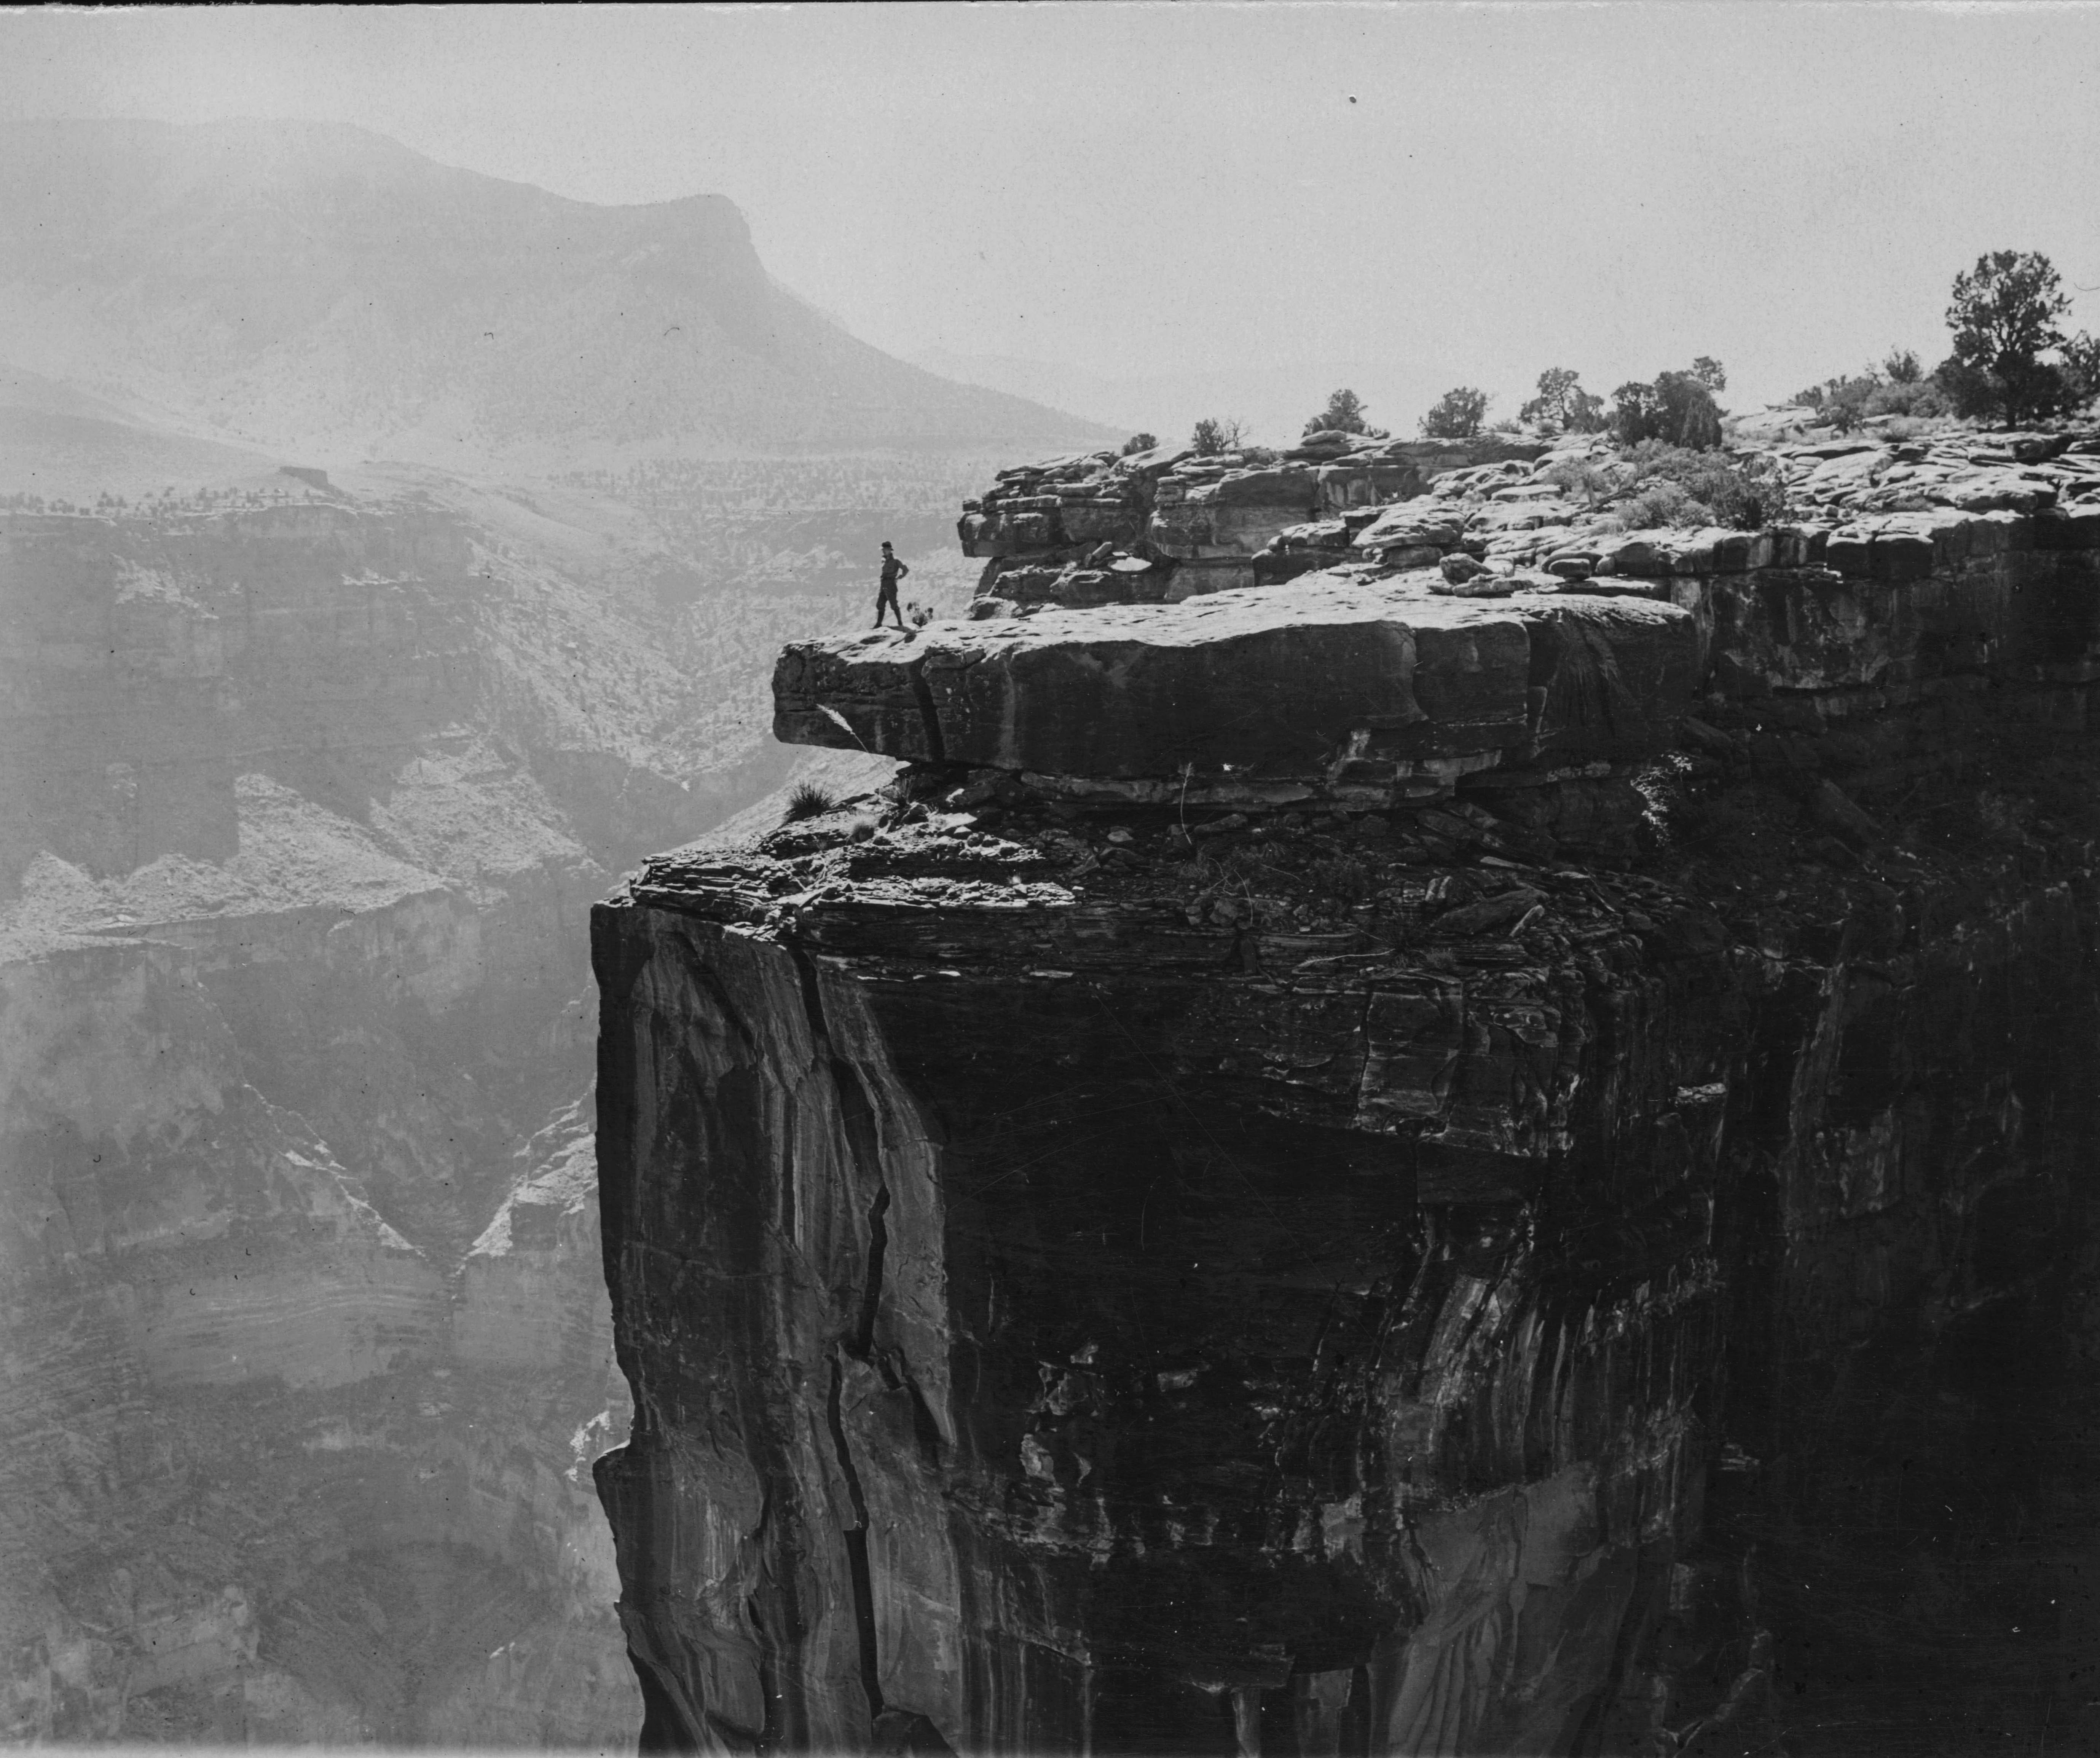 Photograph of a person on the edge of a cliff in the Grand Canyon, Arizona, 1900-1940. | src USC Digital Library